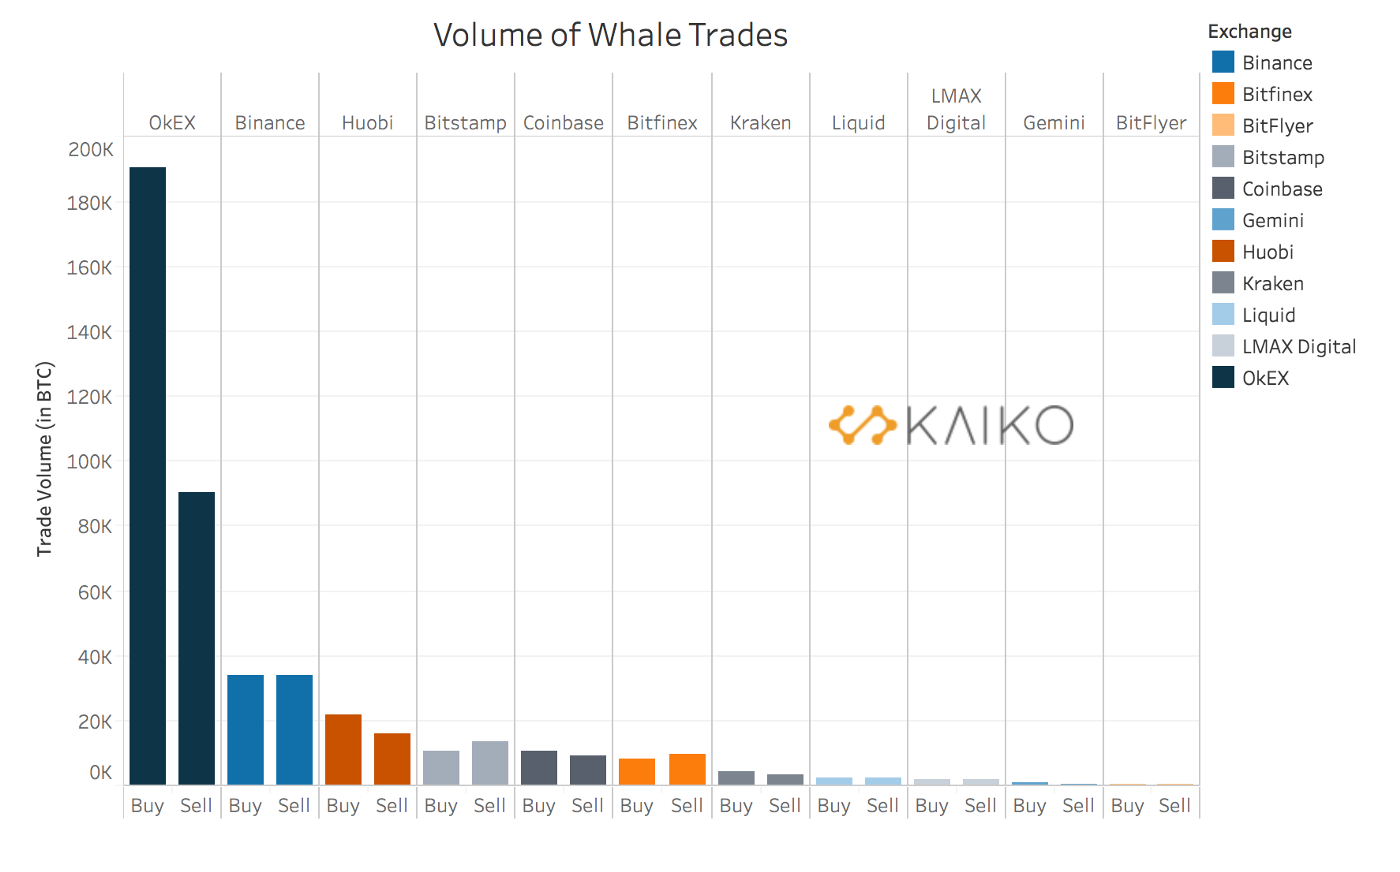 Volume of buy & sell whale Bitcoin trades (?10 BTC) by exchange